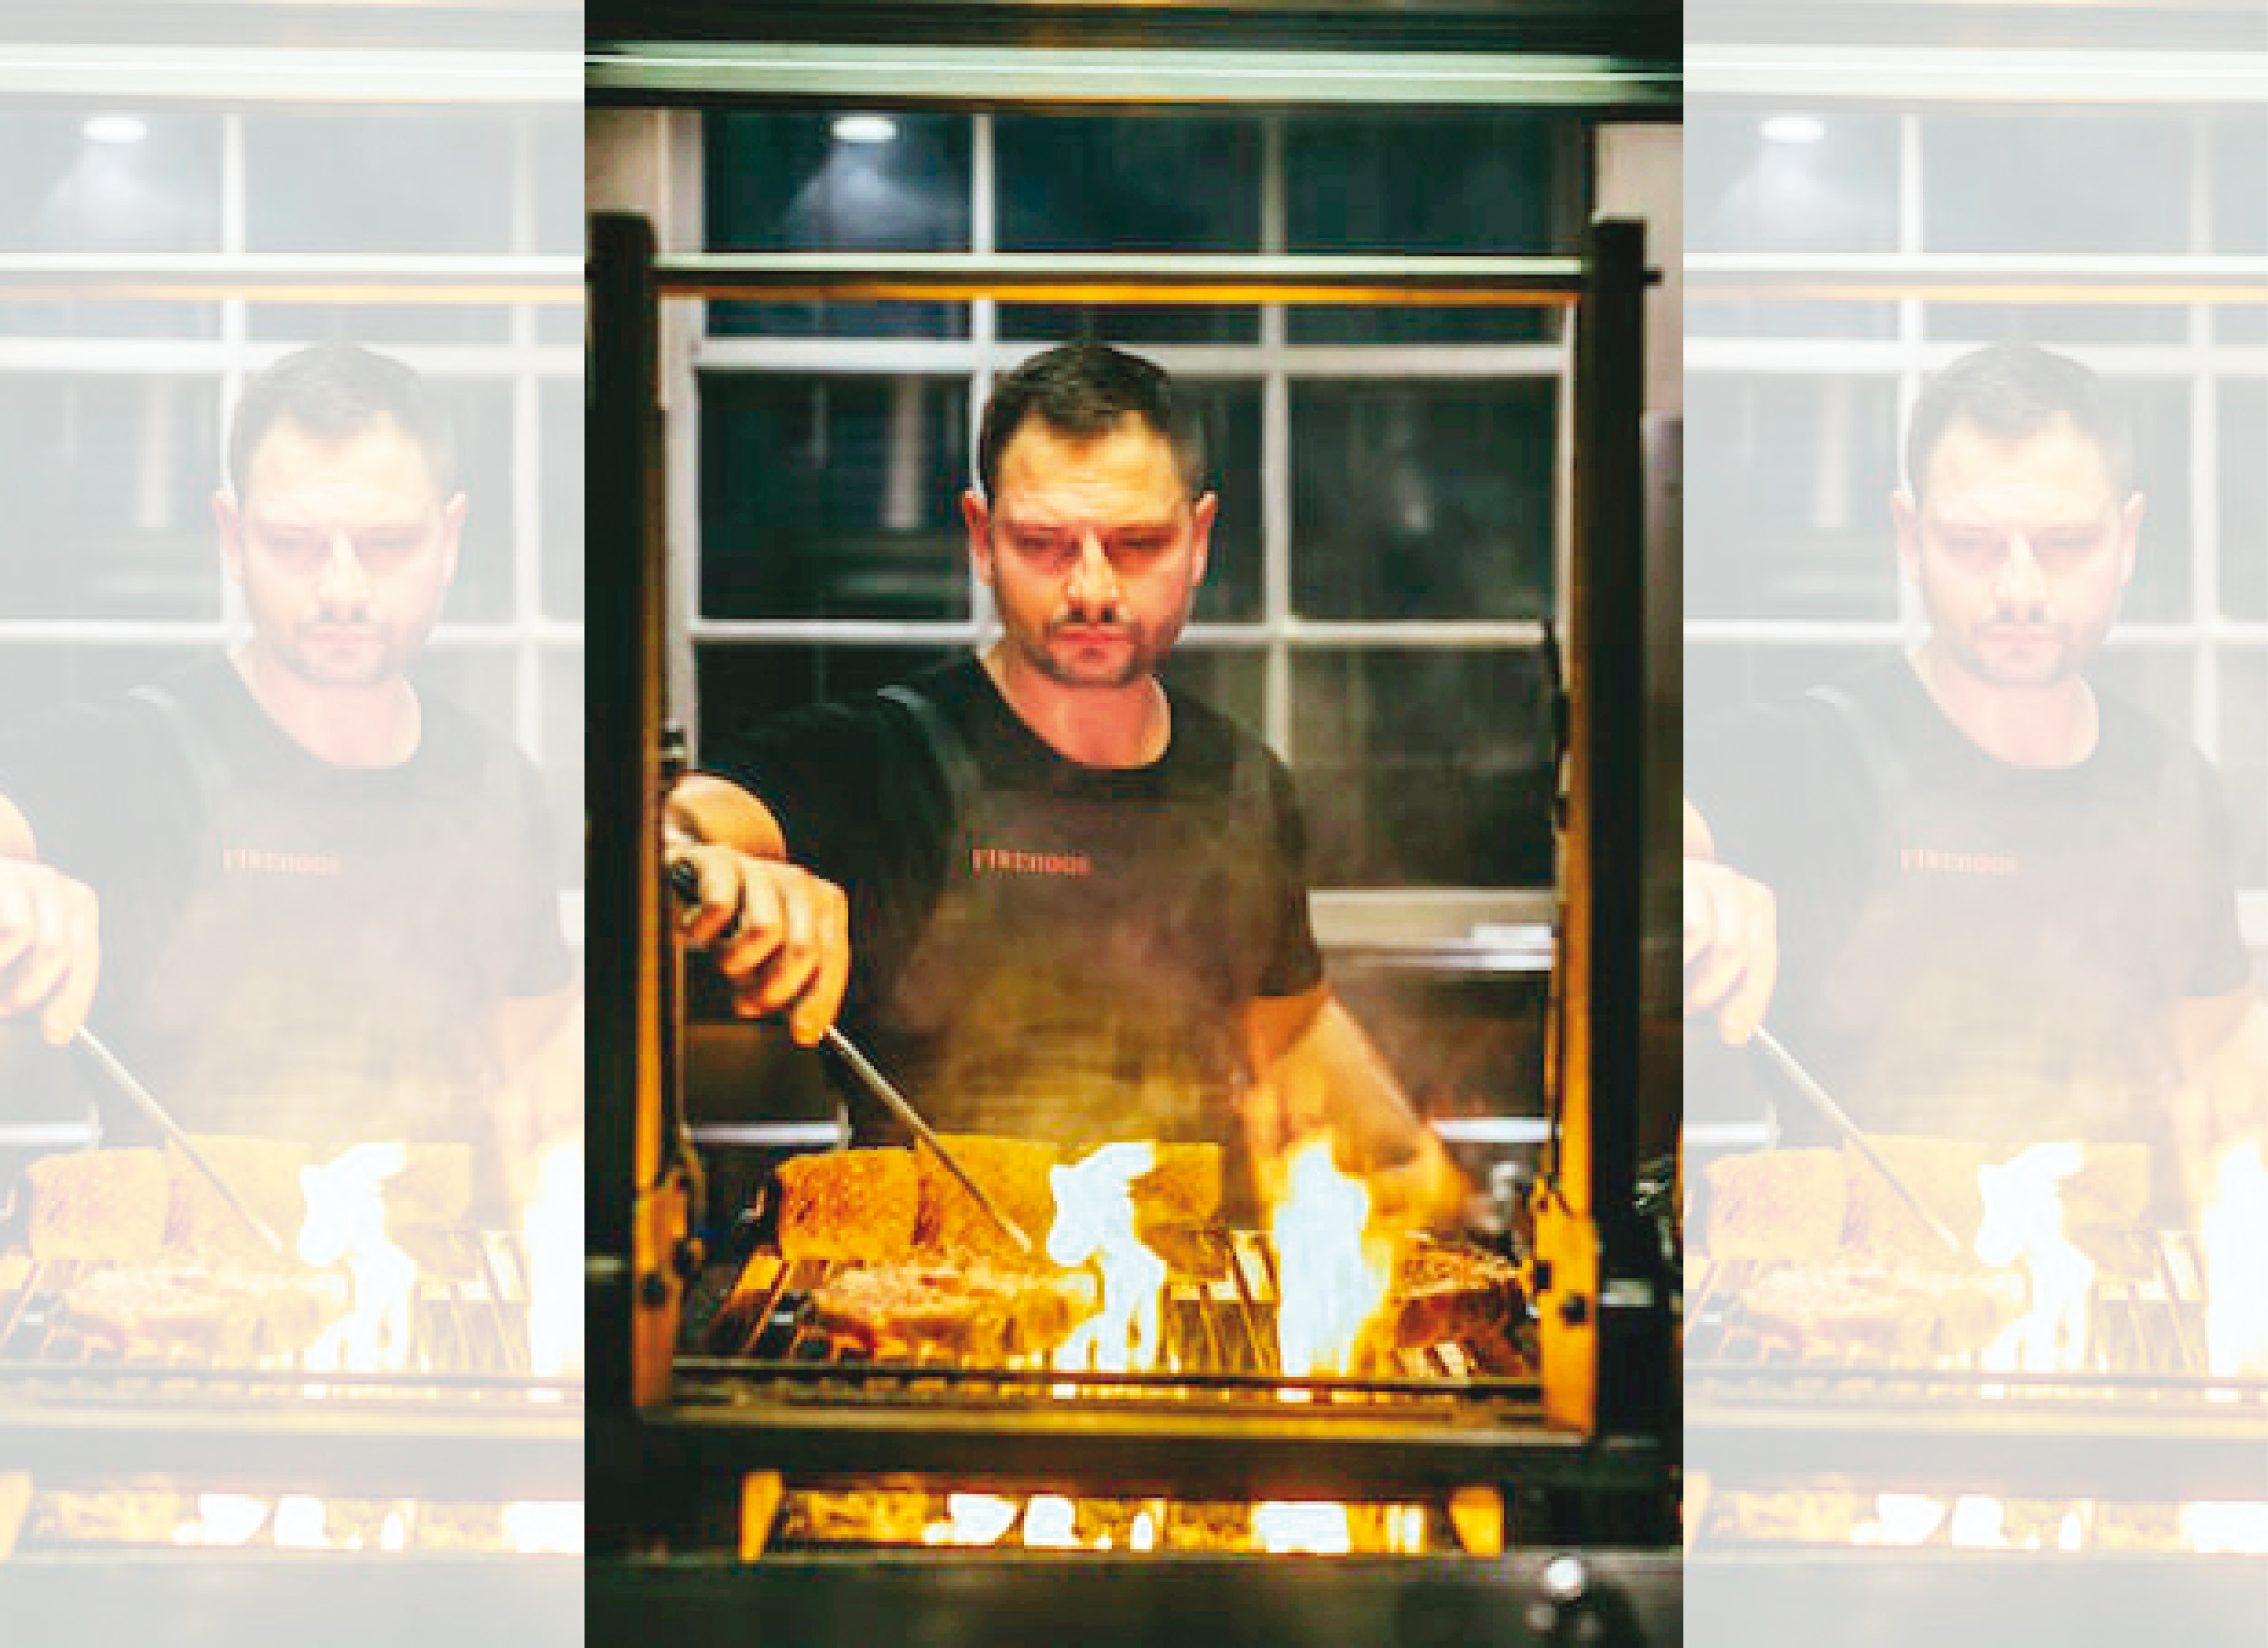 Lennox Hastie has set the standard for cooking with fire and smoke